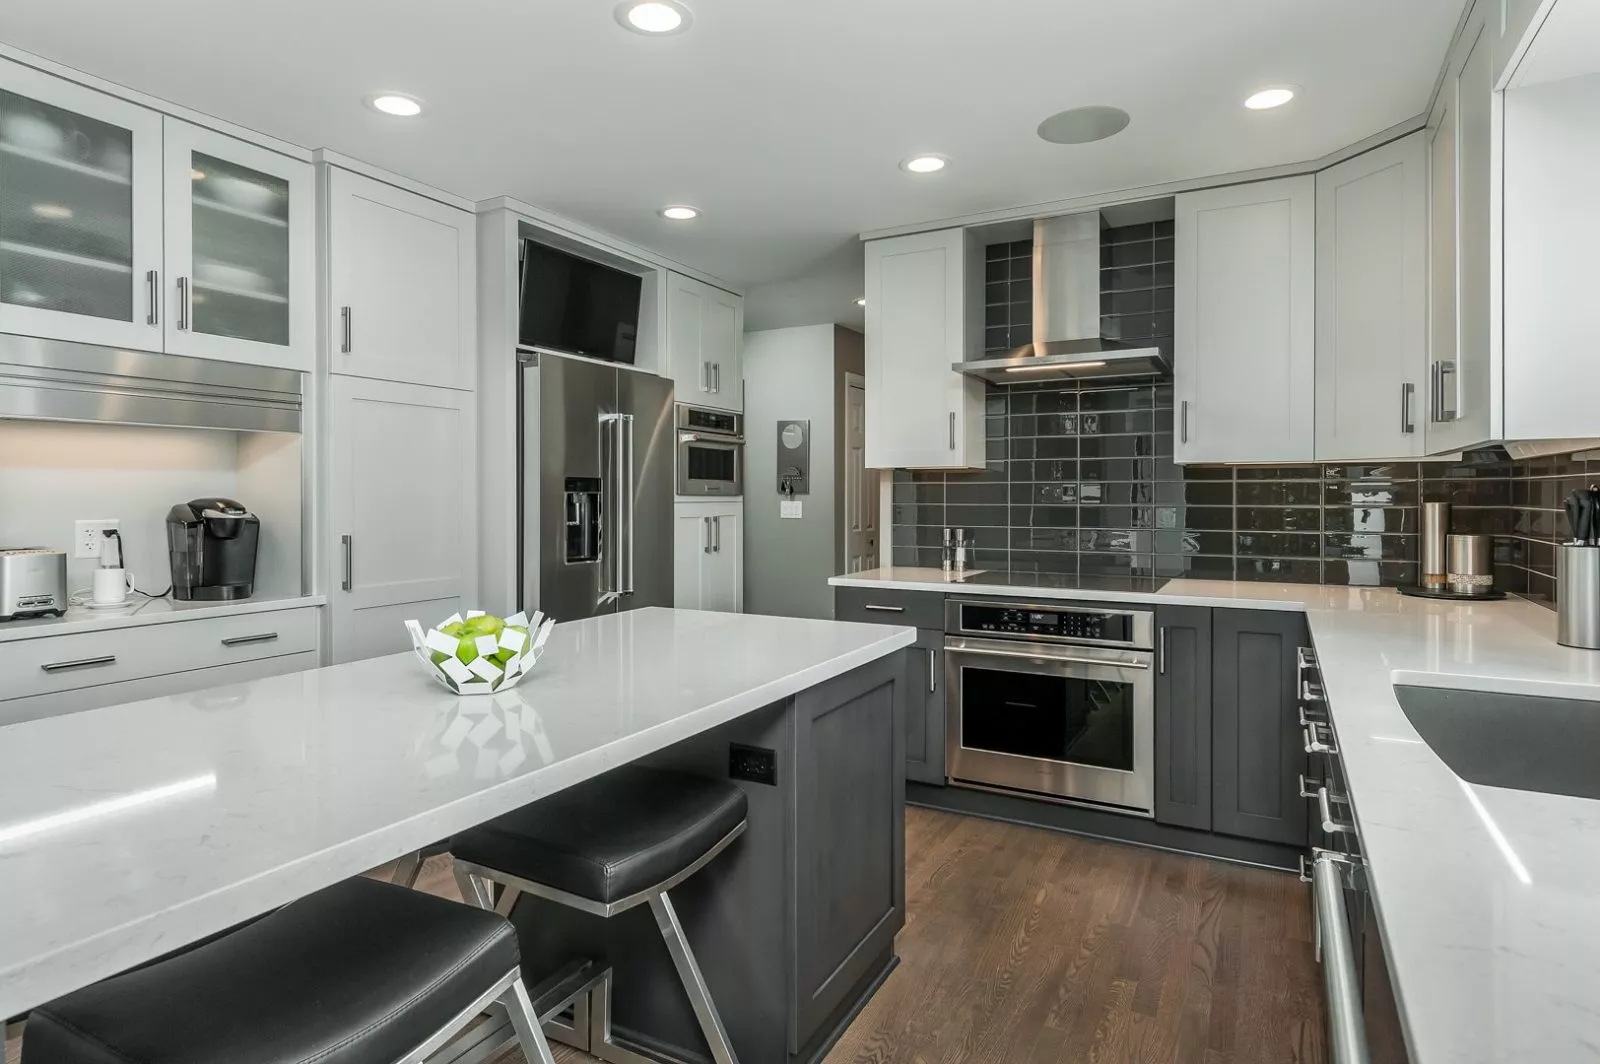 Modern kitchen with island, drawers, cabinets, silver appliances, and polished stone countertops